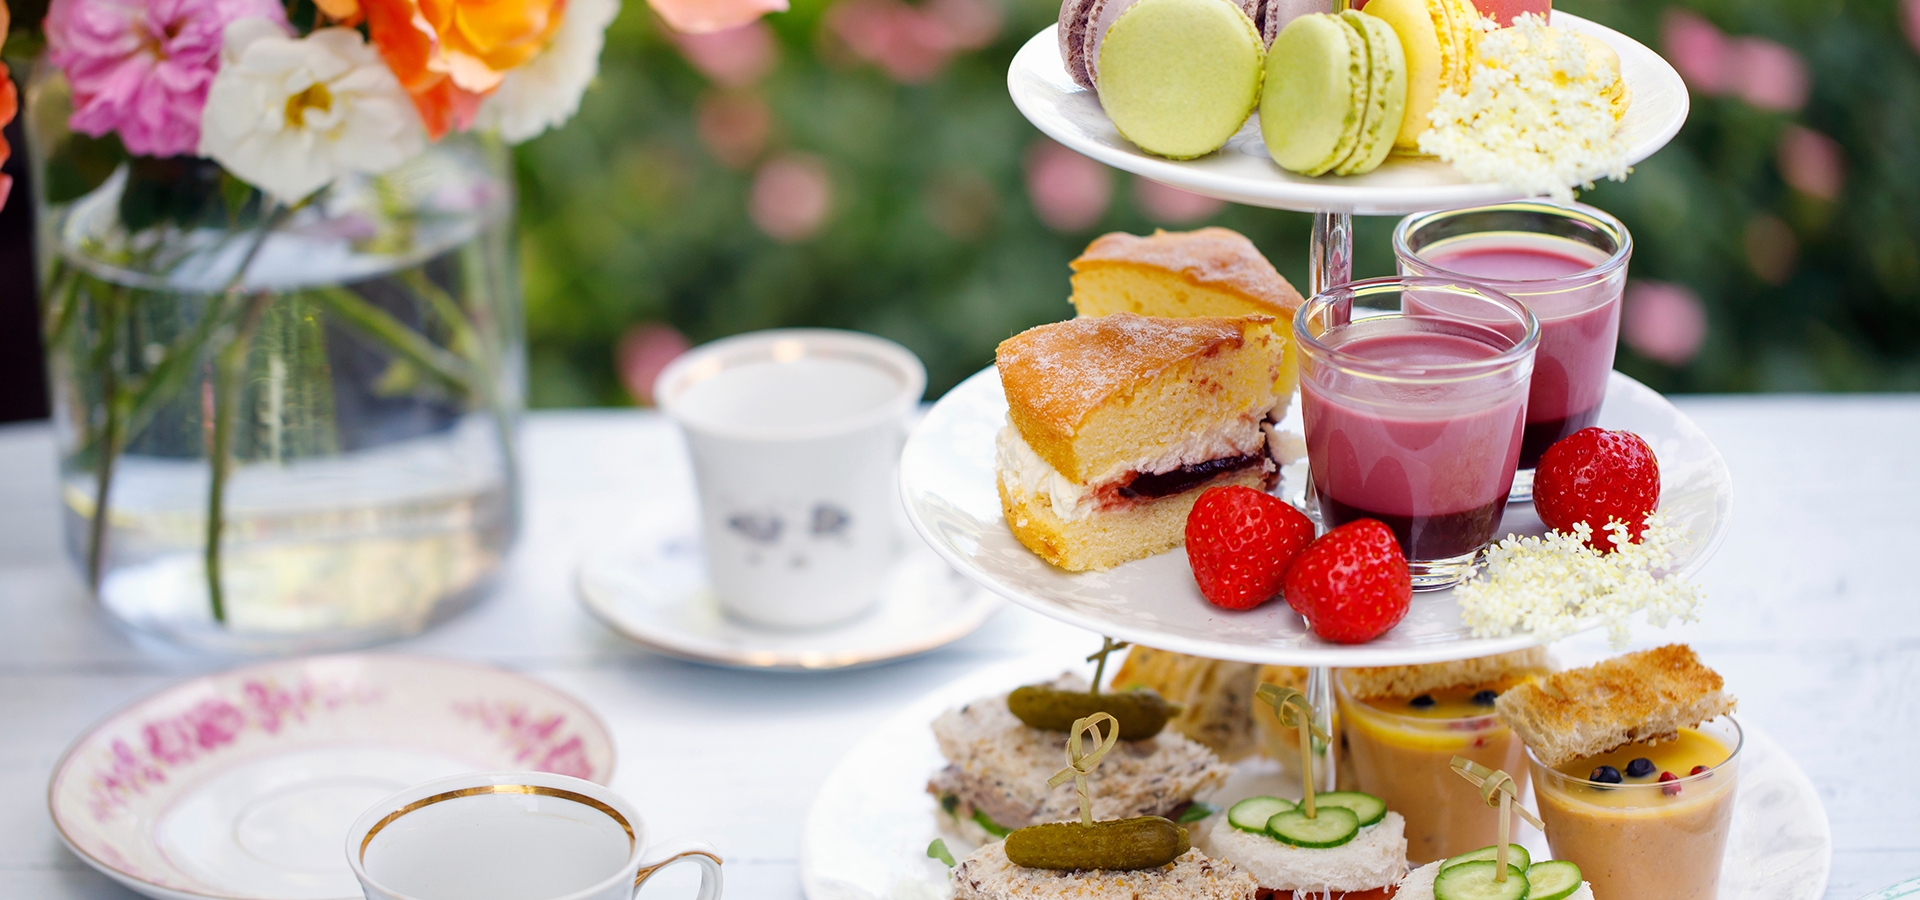 __Coming Soon__ Monthly Afternoon Tea at The Centre | Cambridge Cancer Help Centre